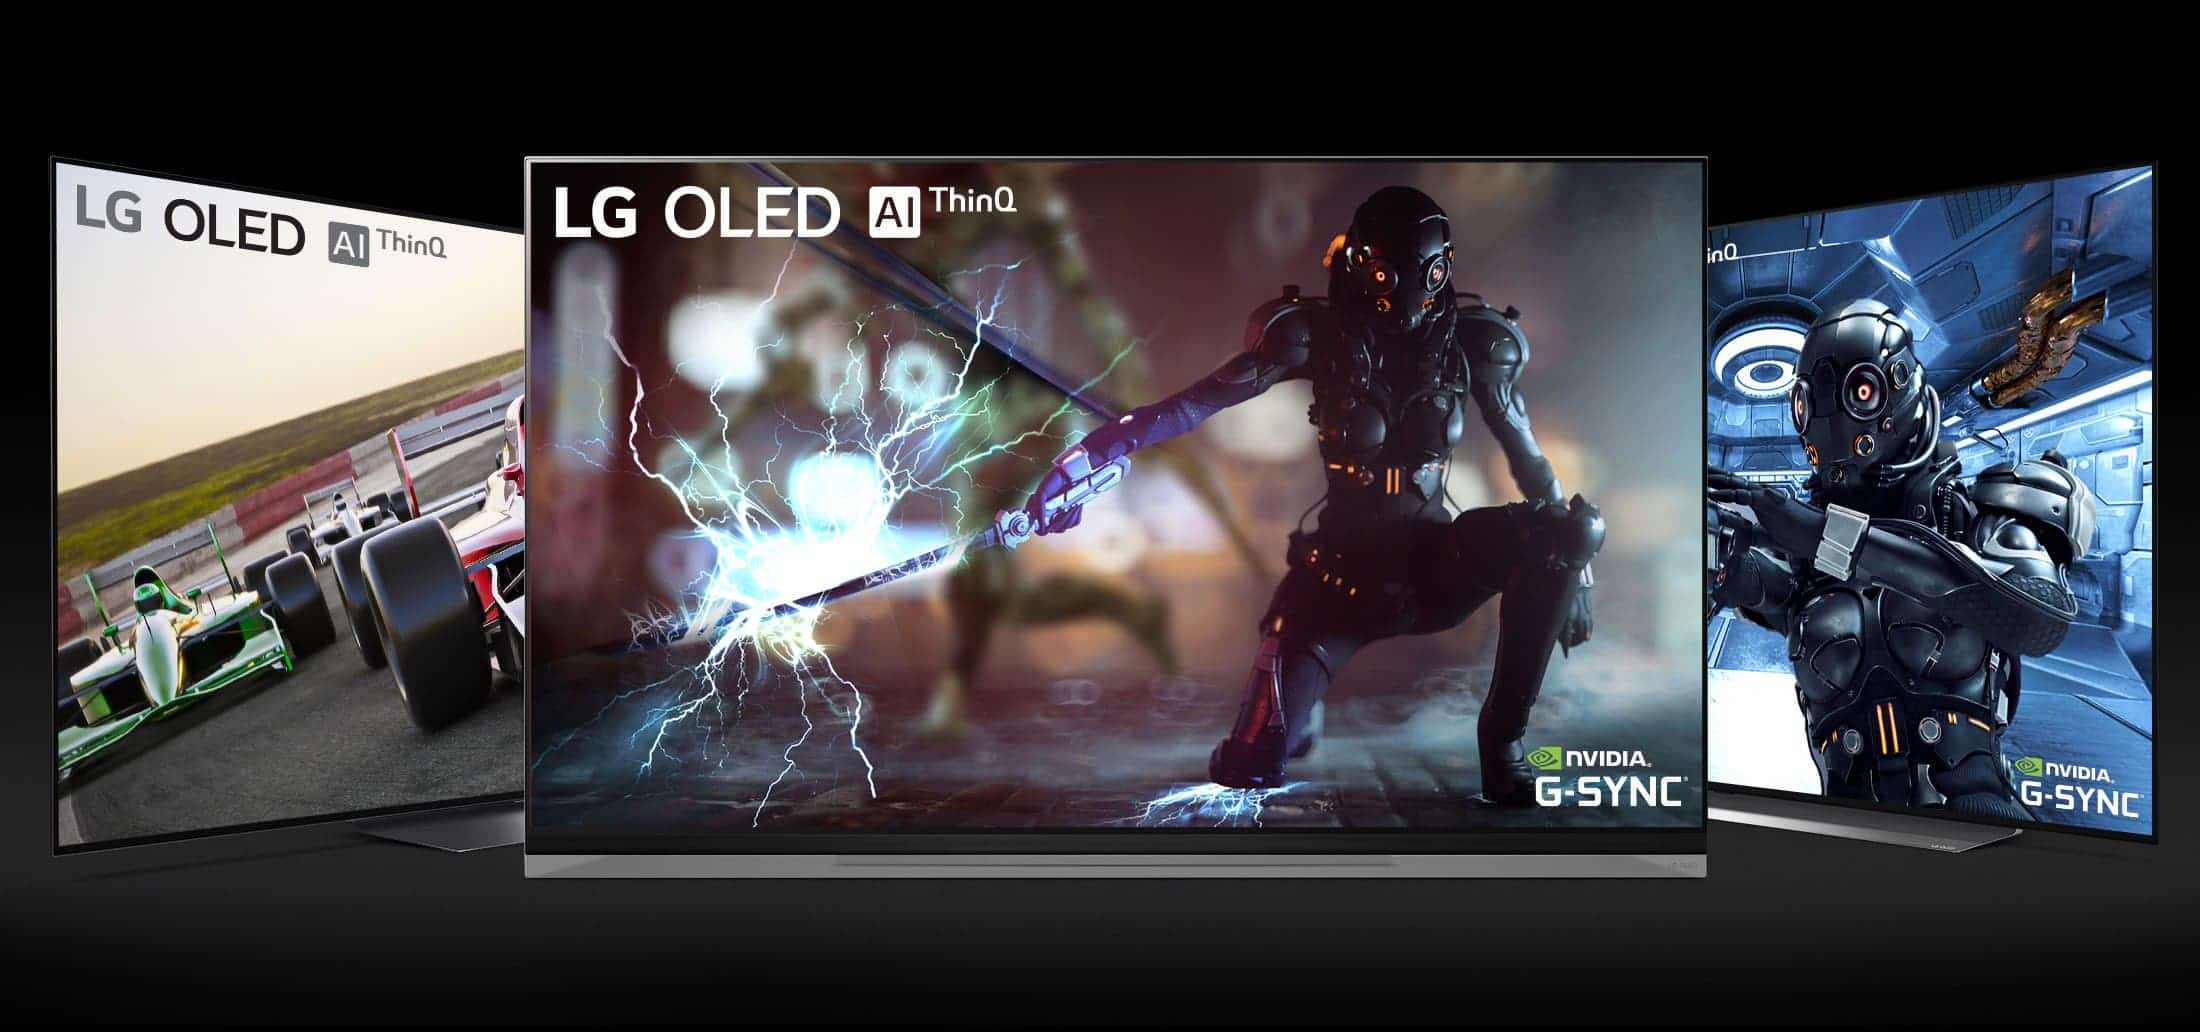 GeForce Now is about to begin broadcasting PC games to LG TVs